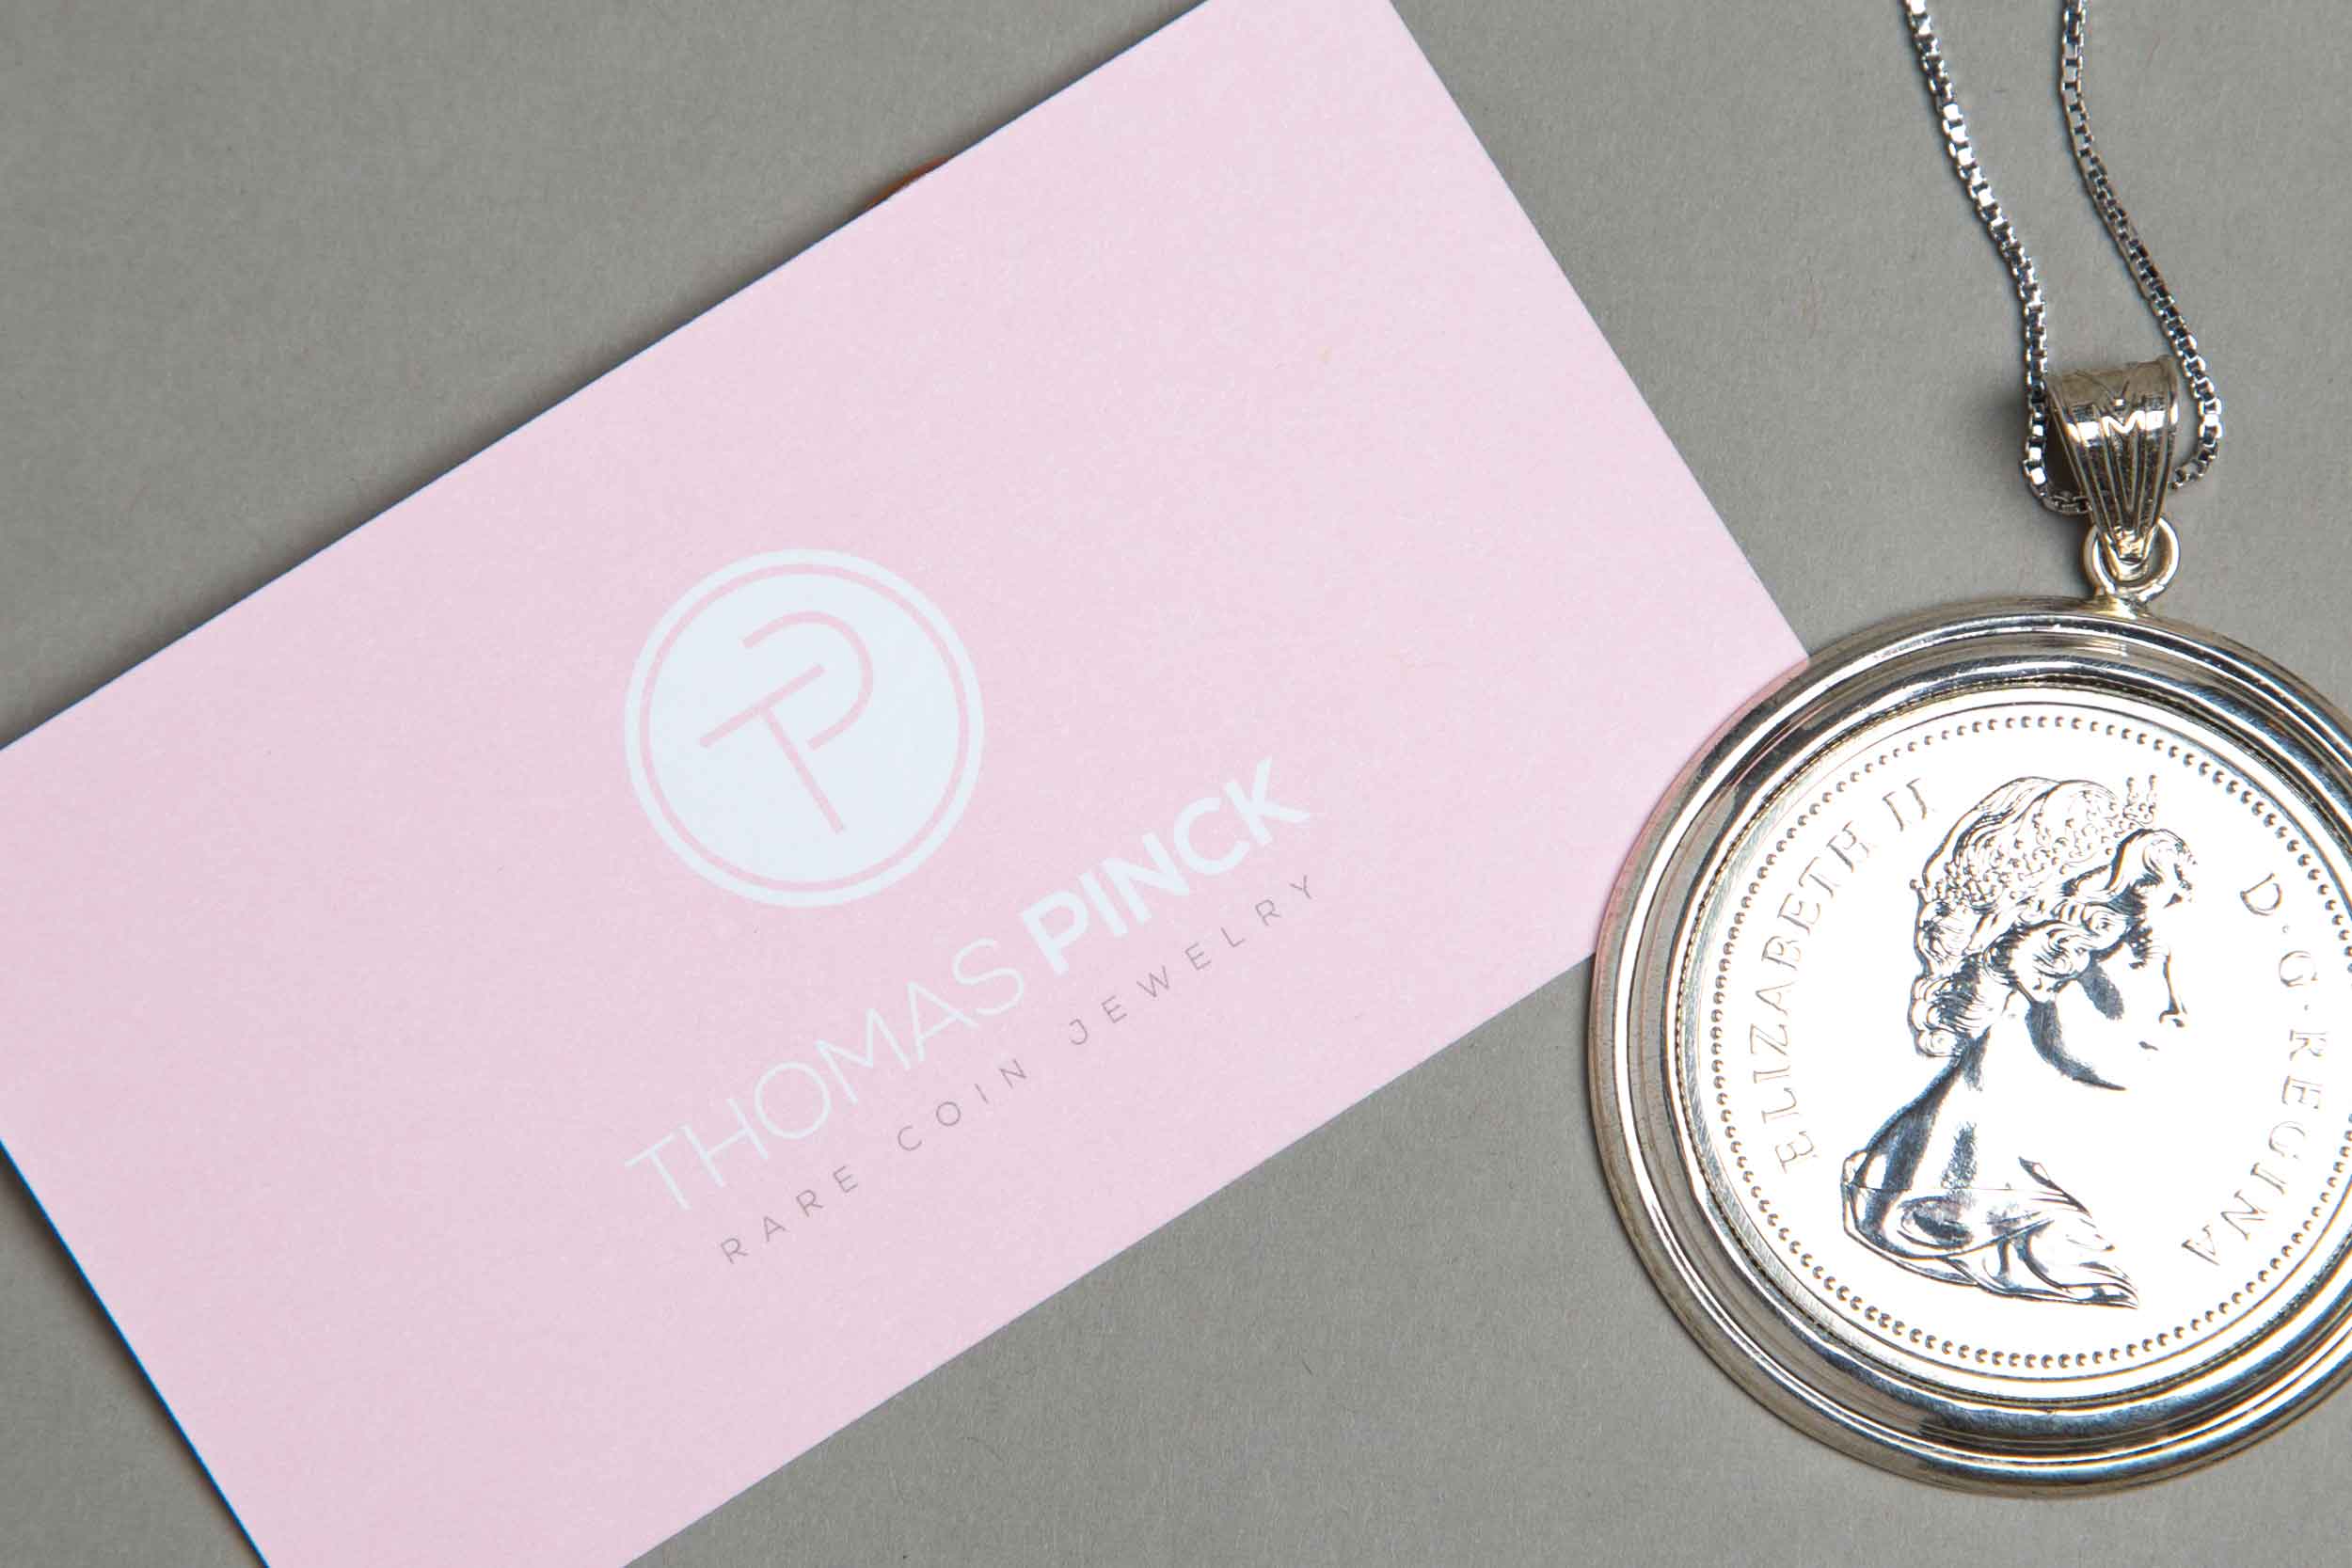 Business card and rare coin necklace for the Thomas Pinck brand.